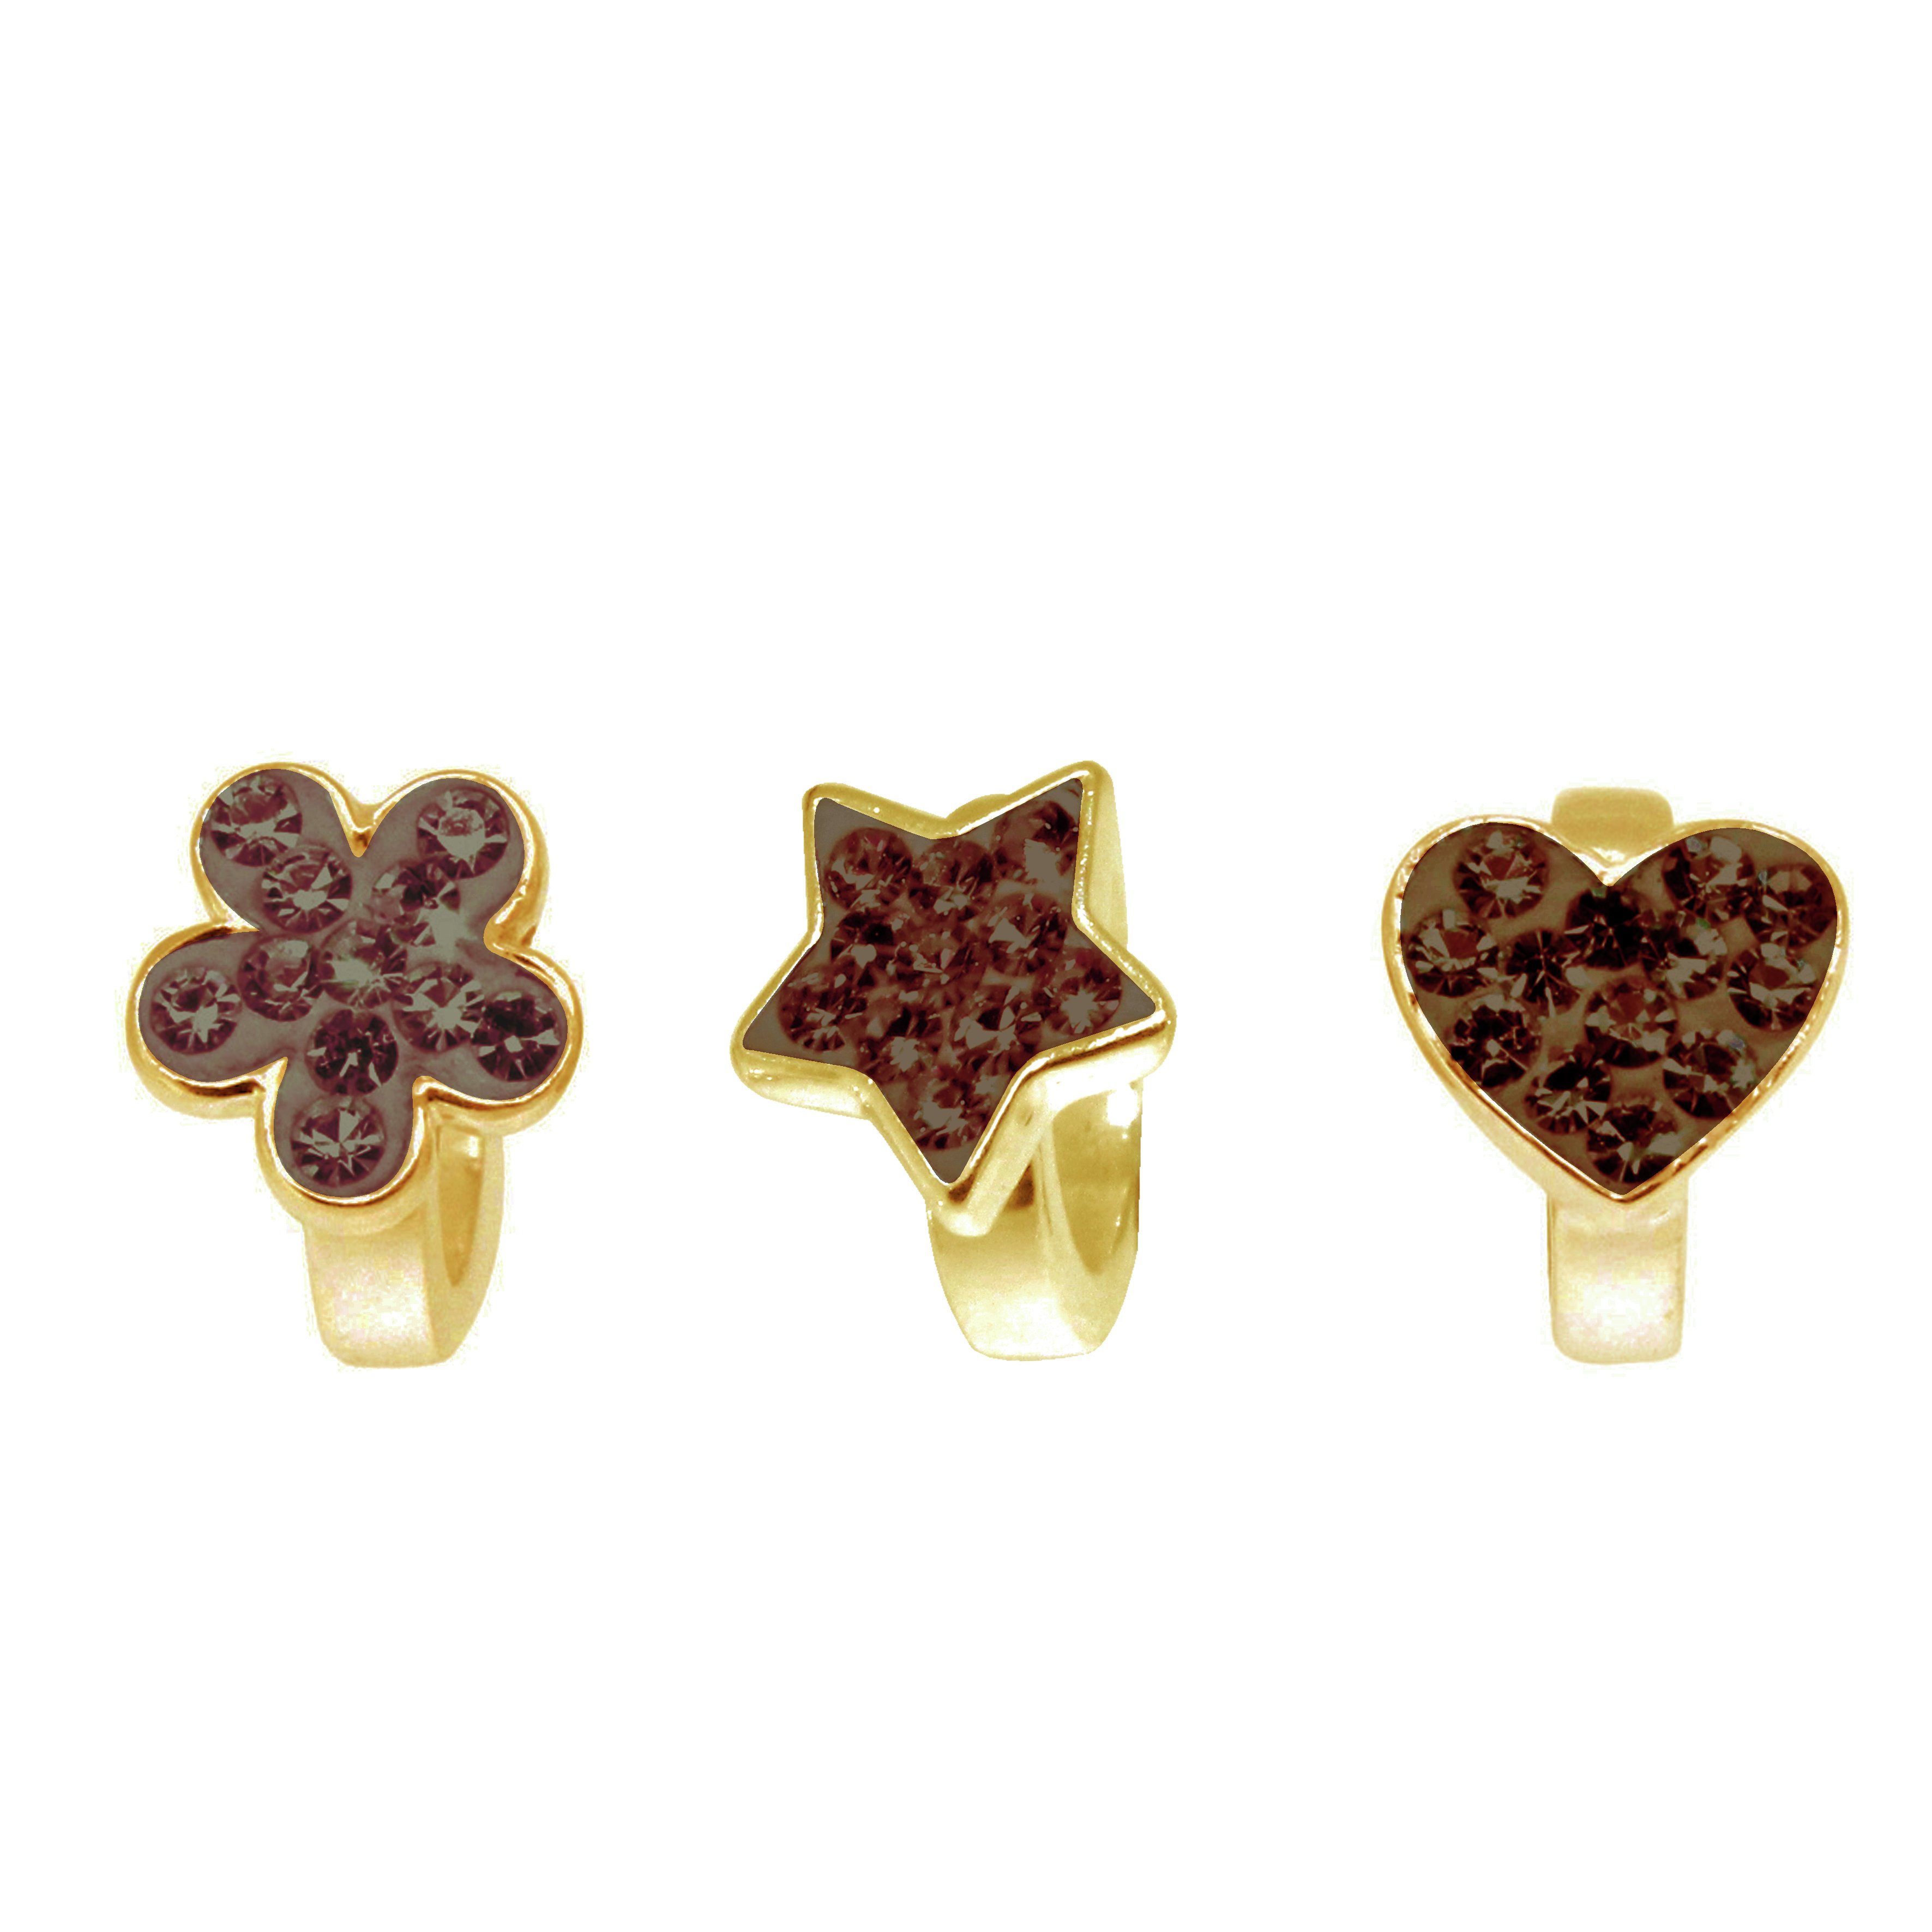 Link Up Gold Plated Flower, Star and Heart Charms - Set of 3